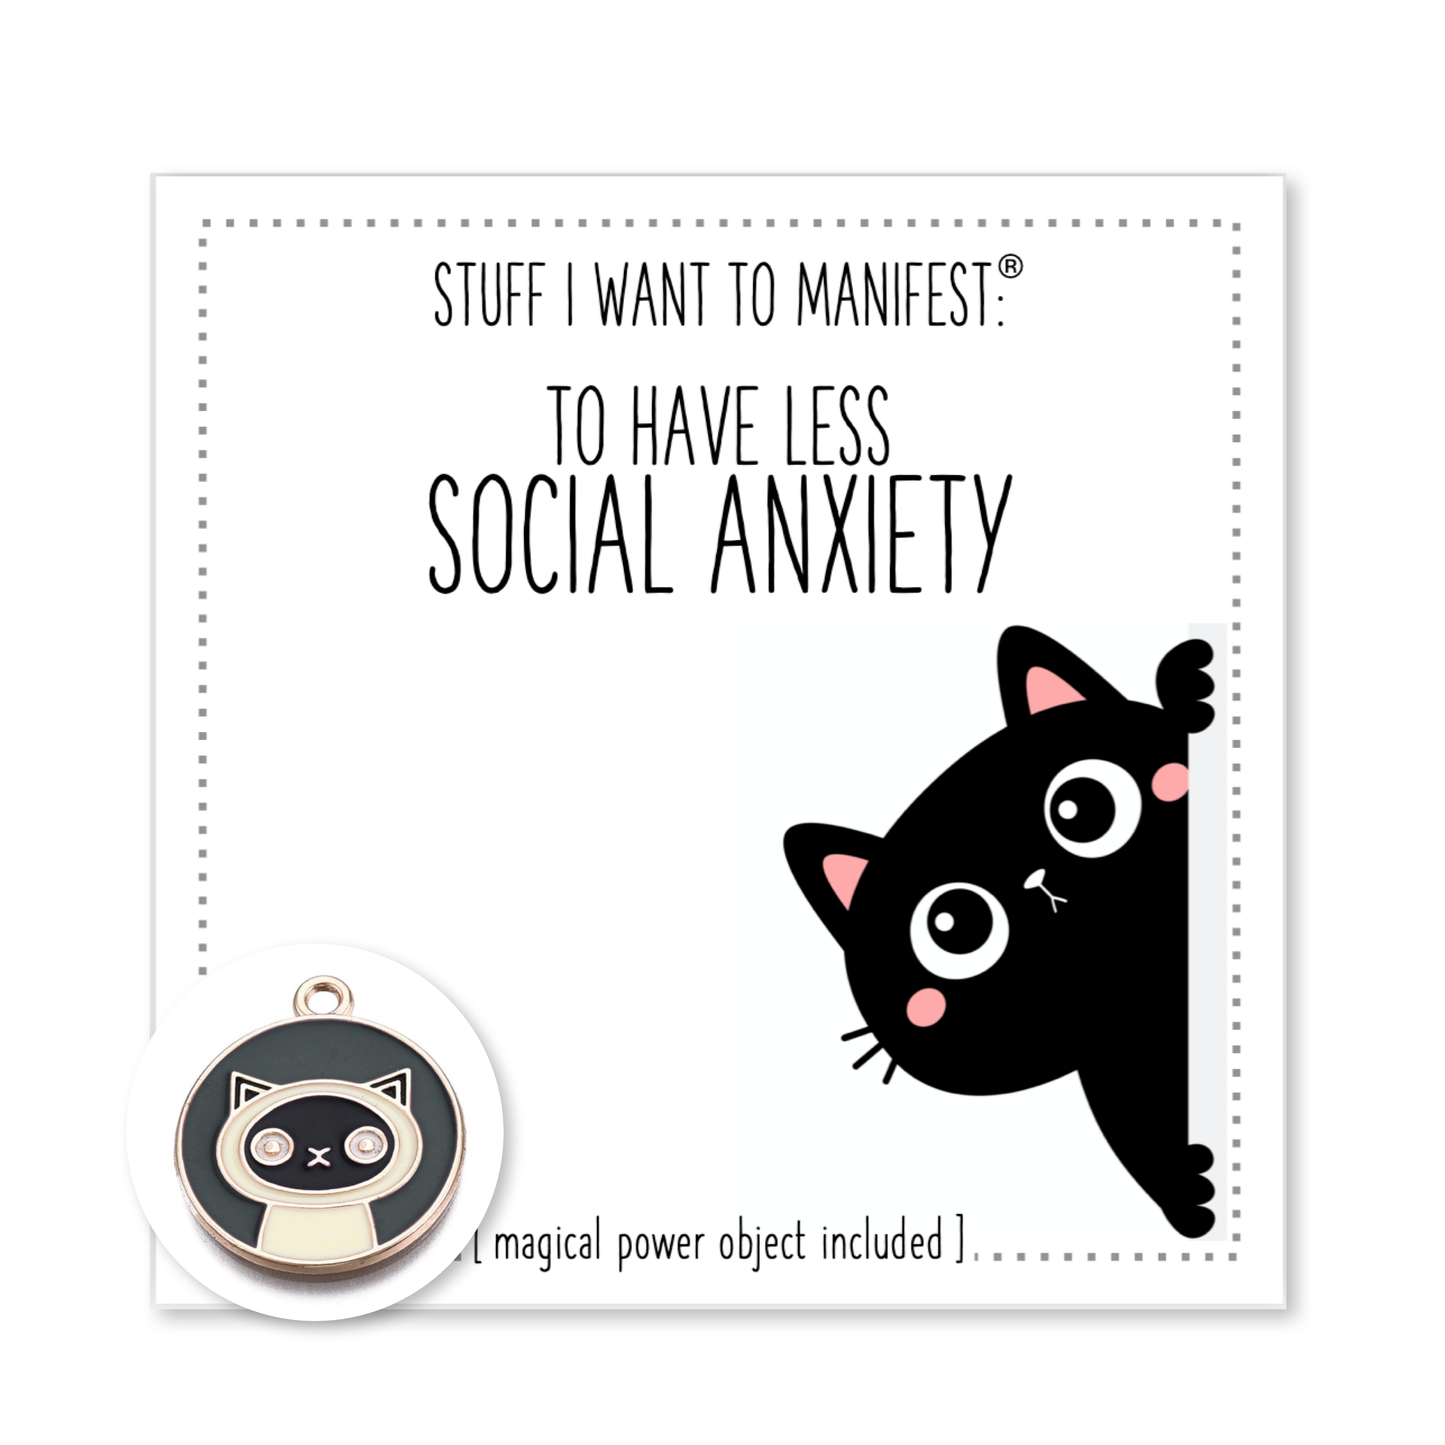 Stuff I Want To Manifest : TO HAVE LESS SOCIAL ANXIETY